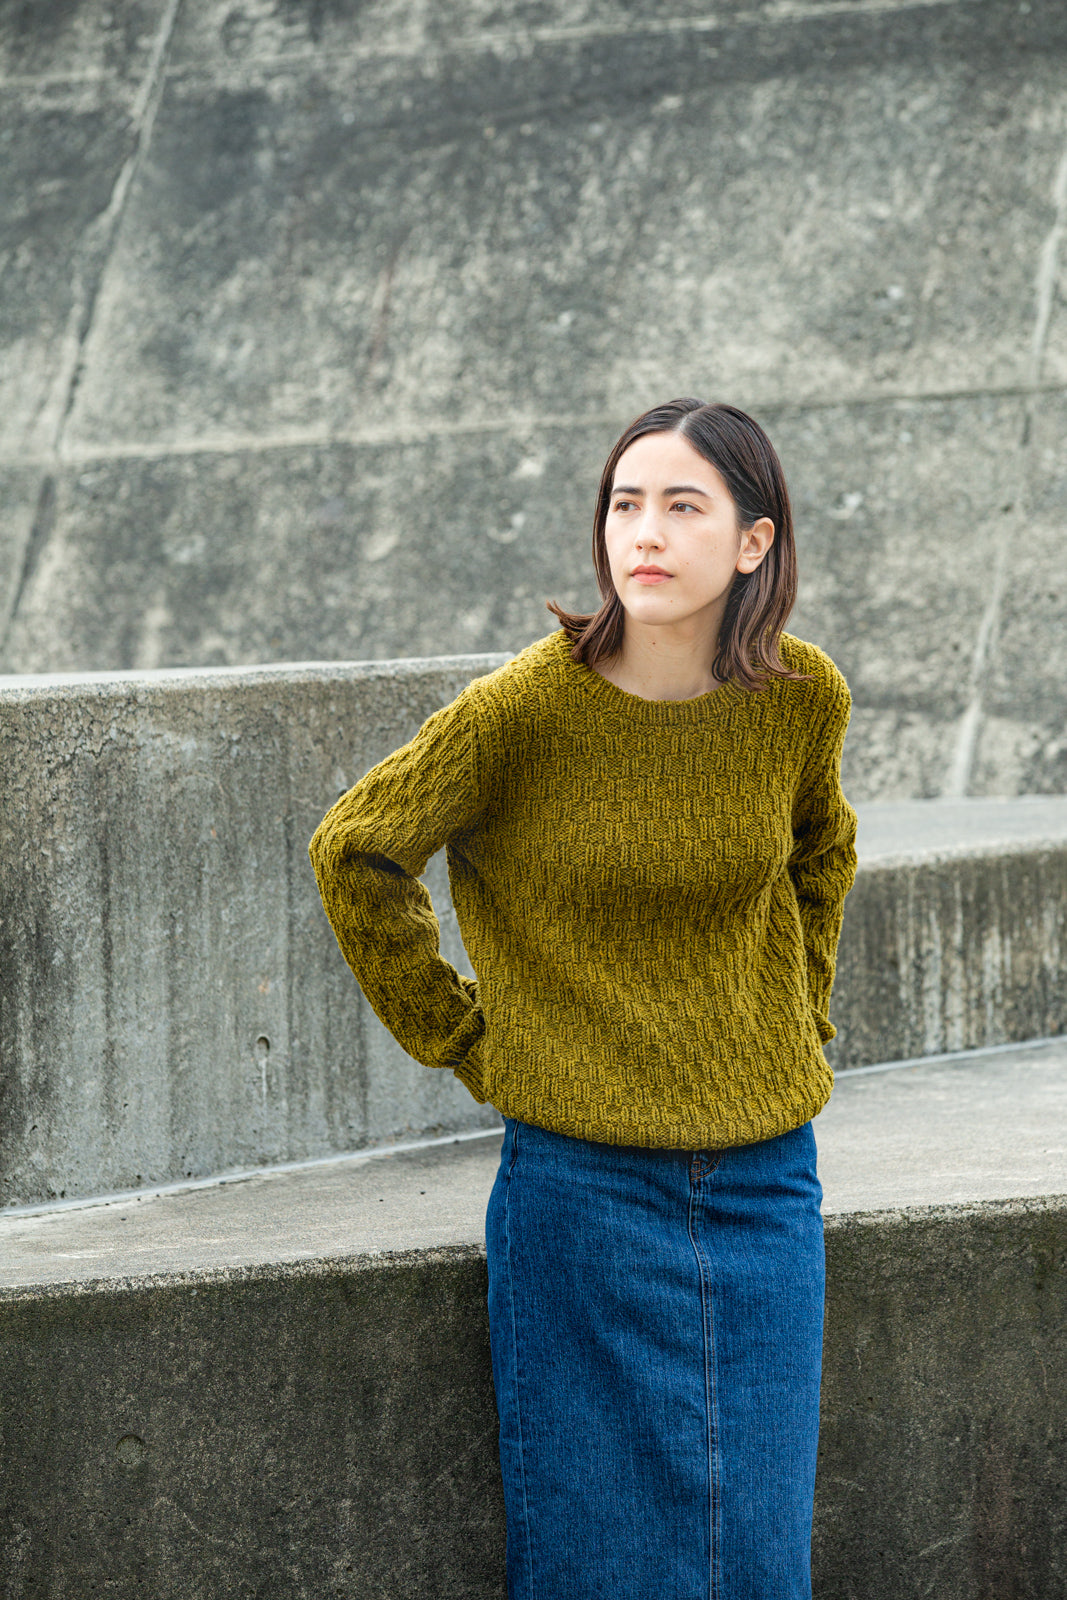 Northern Lights: A Collection with Brooklyn Tweed